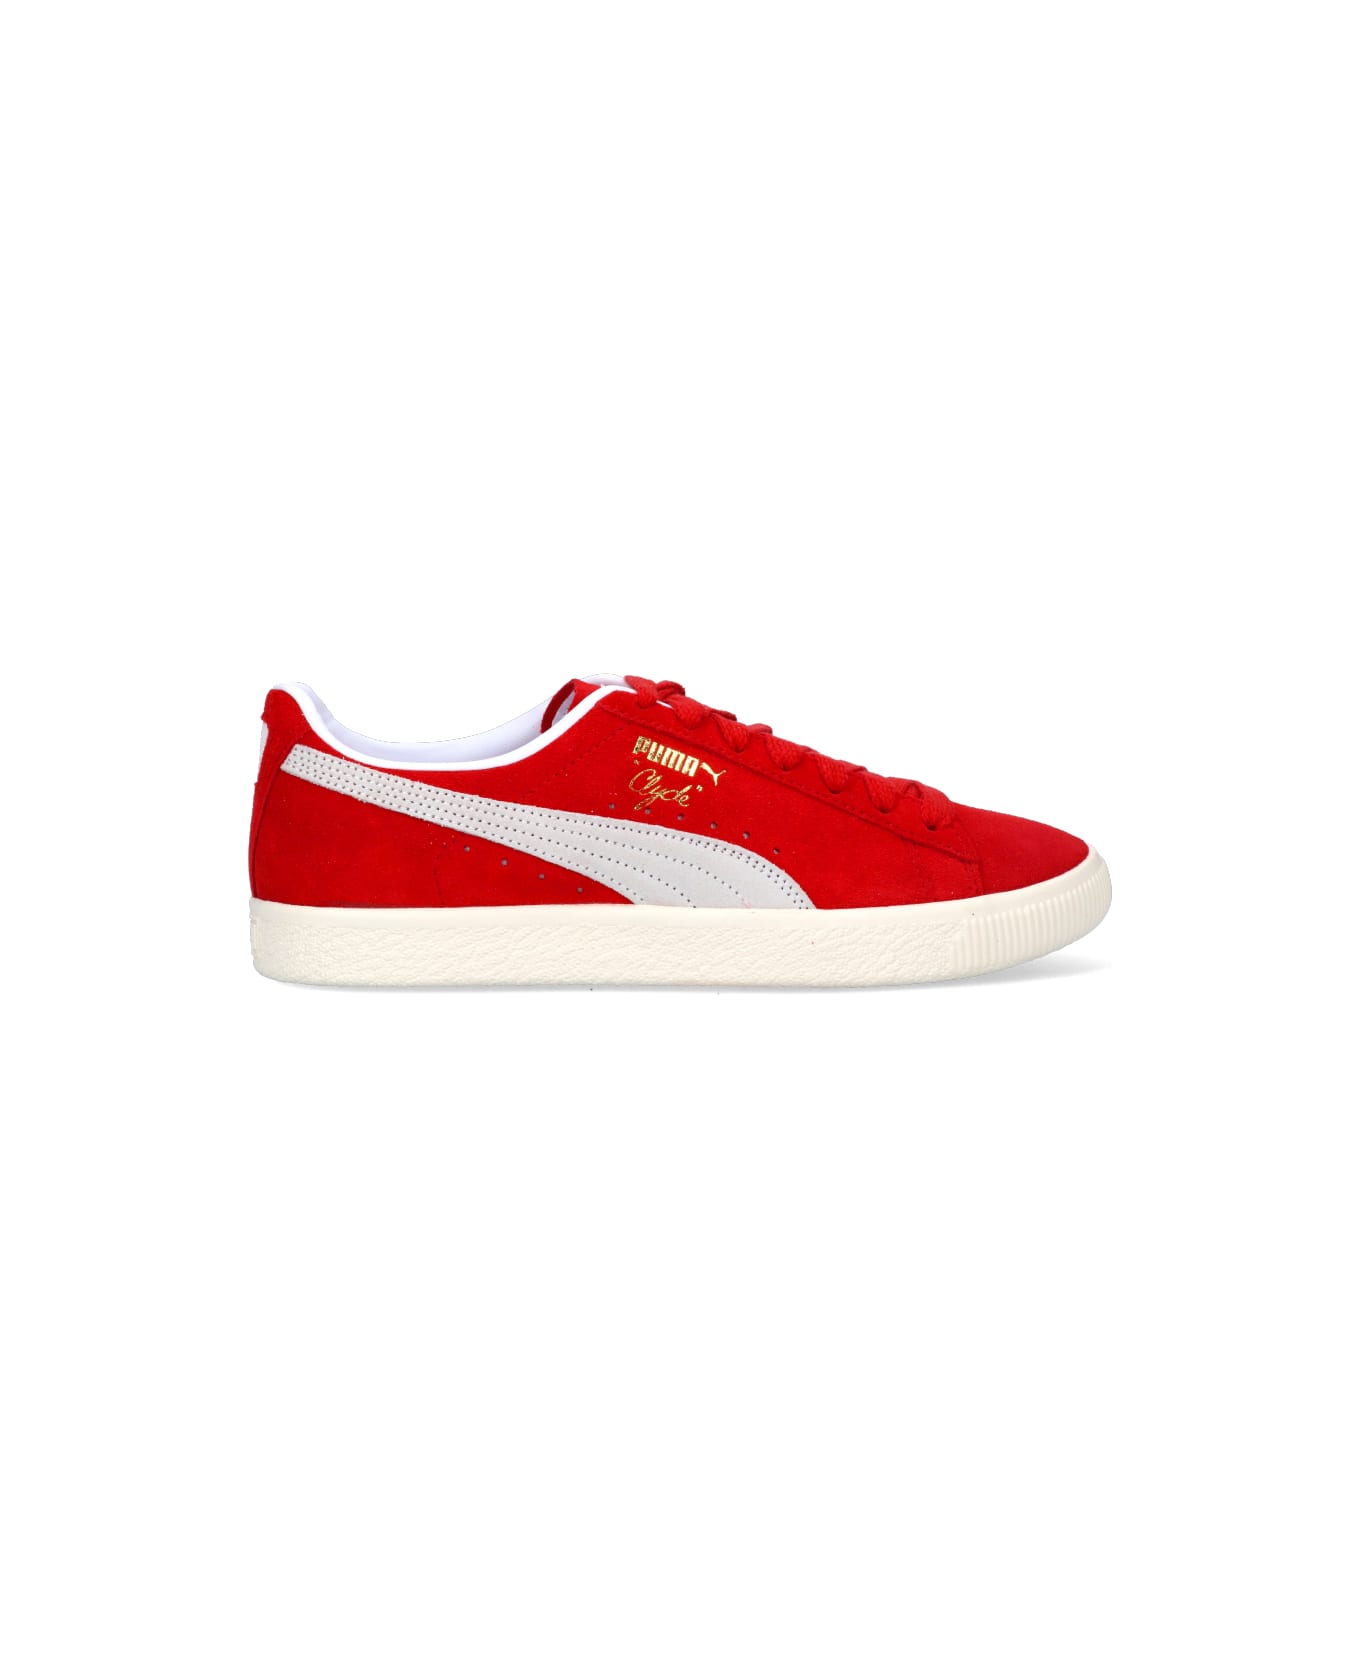 Puma 'clyde Og' Sneakers - Red